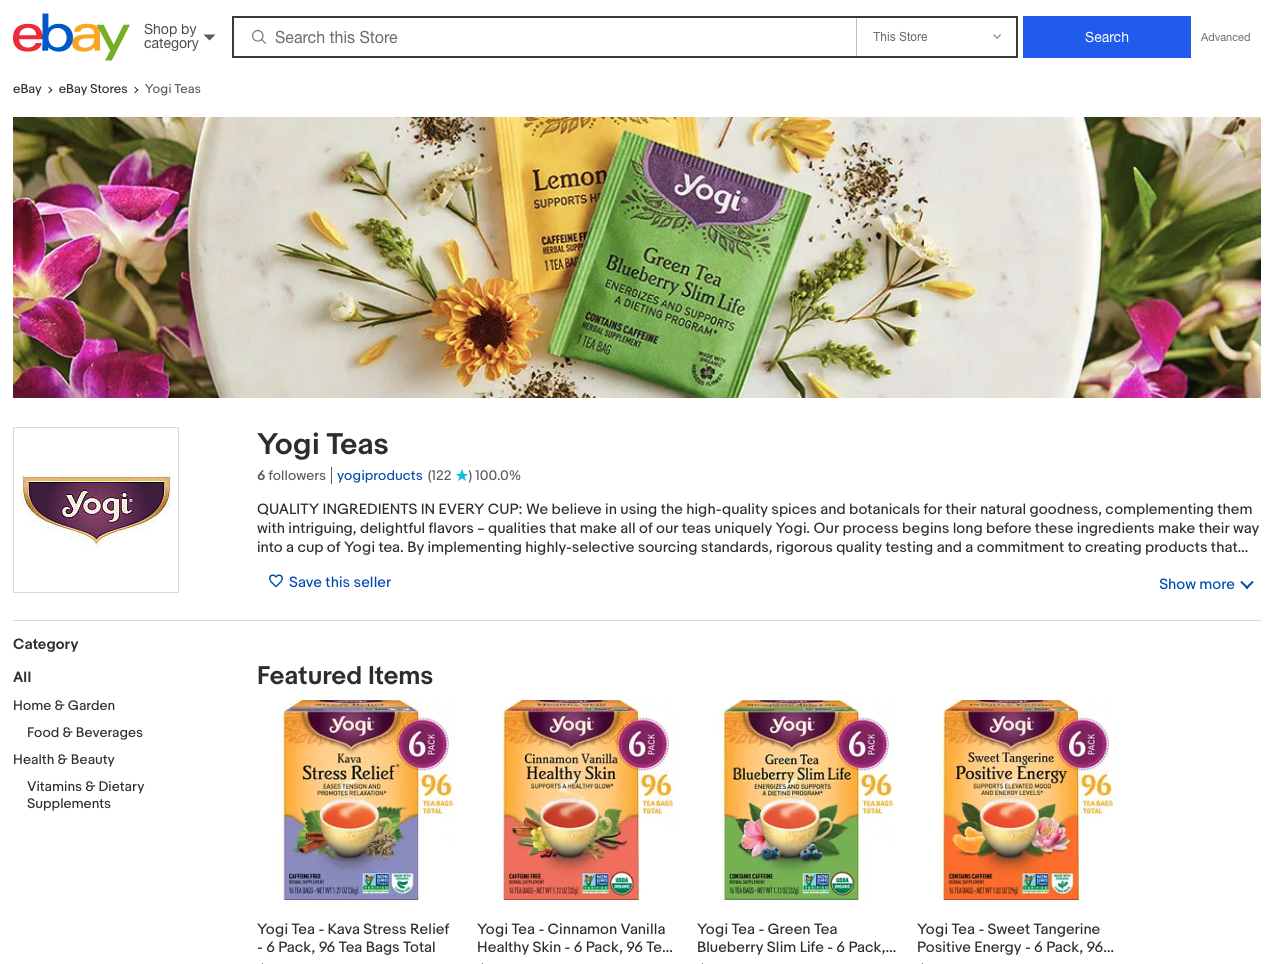 eBay offers customized storefronts to brands, and Pattern's eBay experts helped our brand Yogi Tea create a great product storefront on eBay.